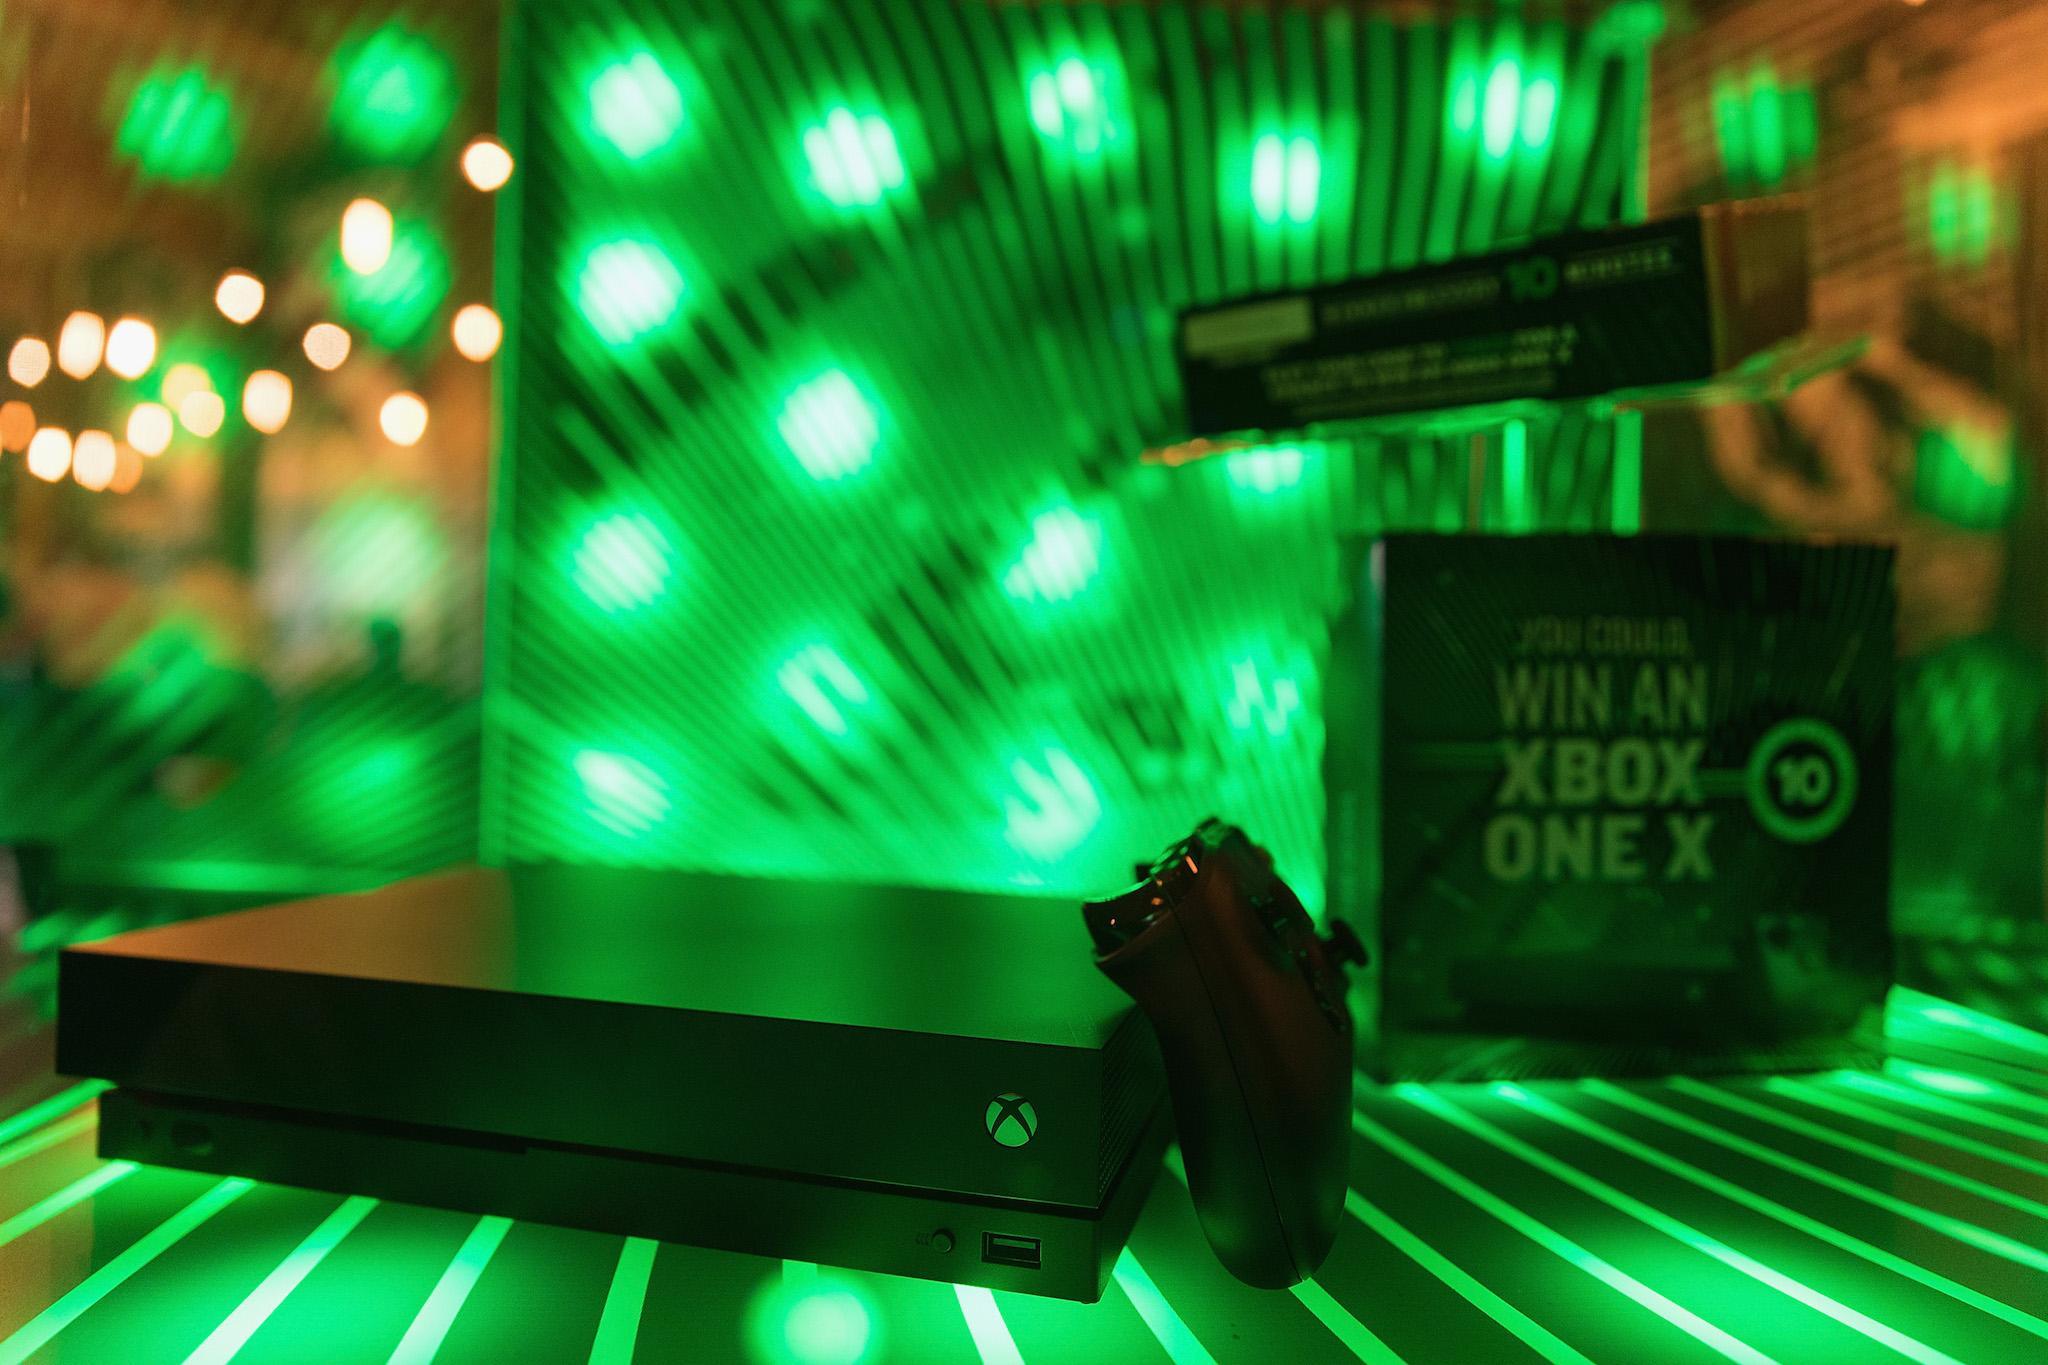 Taco Bell and Xbox partner to give fans the chance to win an Xbox One X with the purchase of a Steak Quesarito $5 Box at The Vude on August 31, 2017 in Seattle, Washington